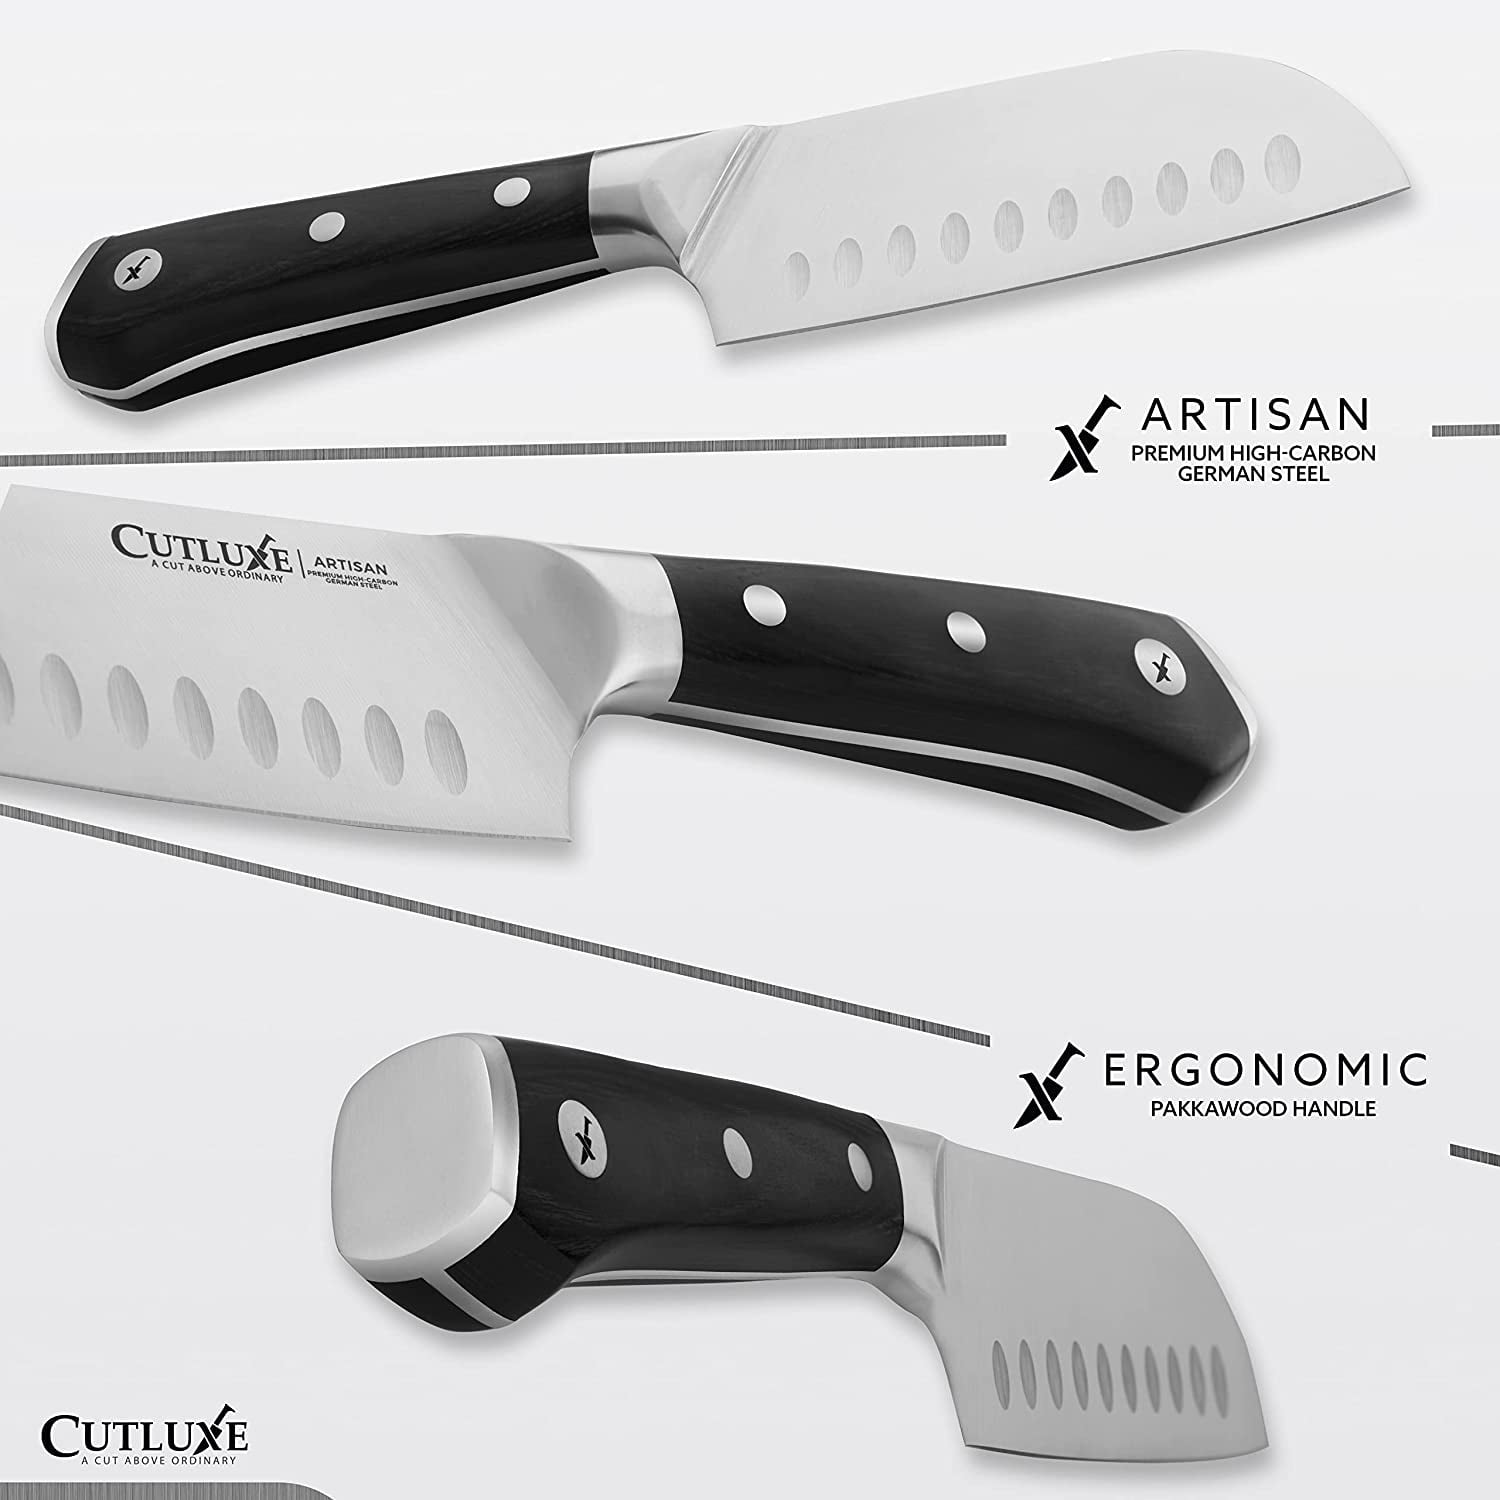 Kotai High Carbon Stainless Steel Pakka 5-Piece Knife Set Essential Deluxe Edition